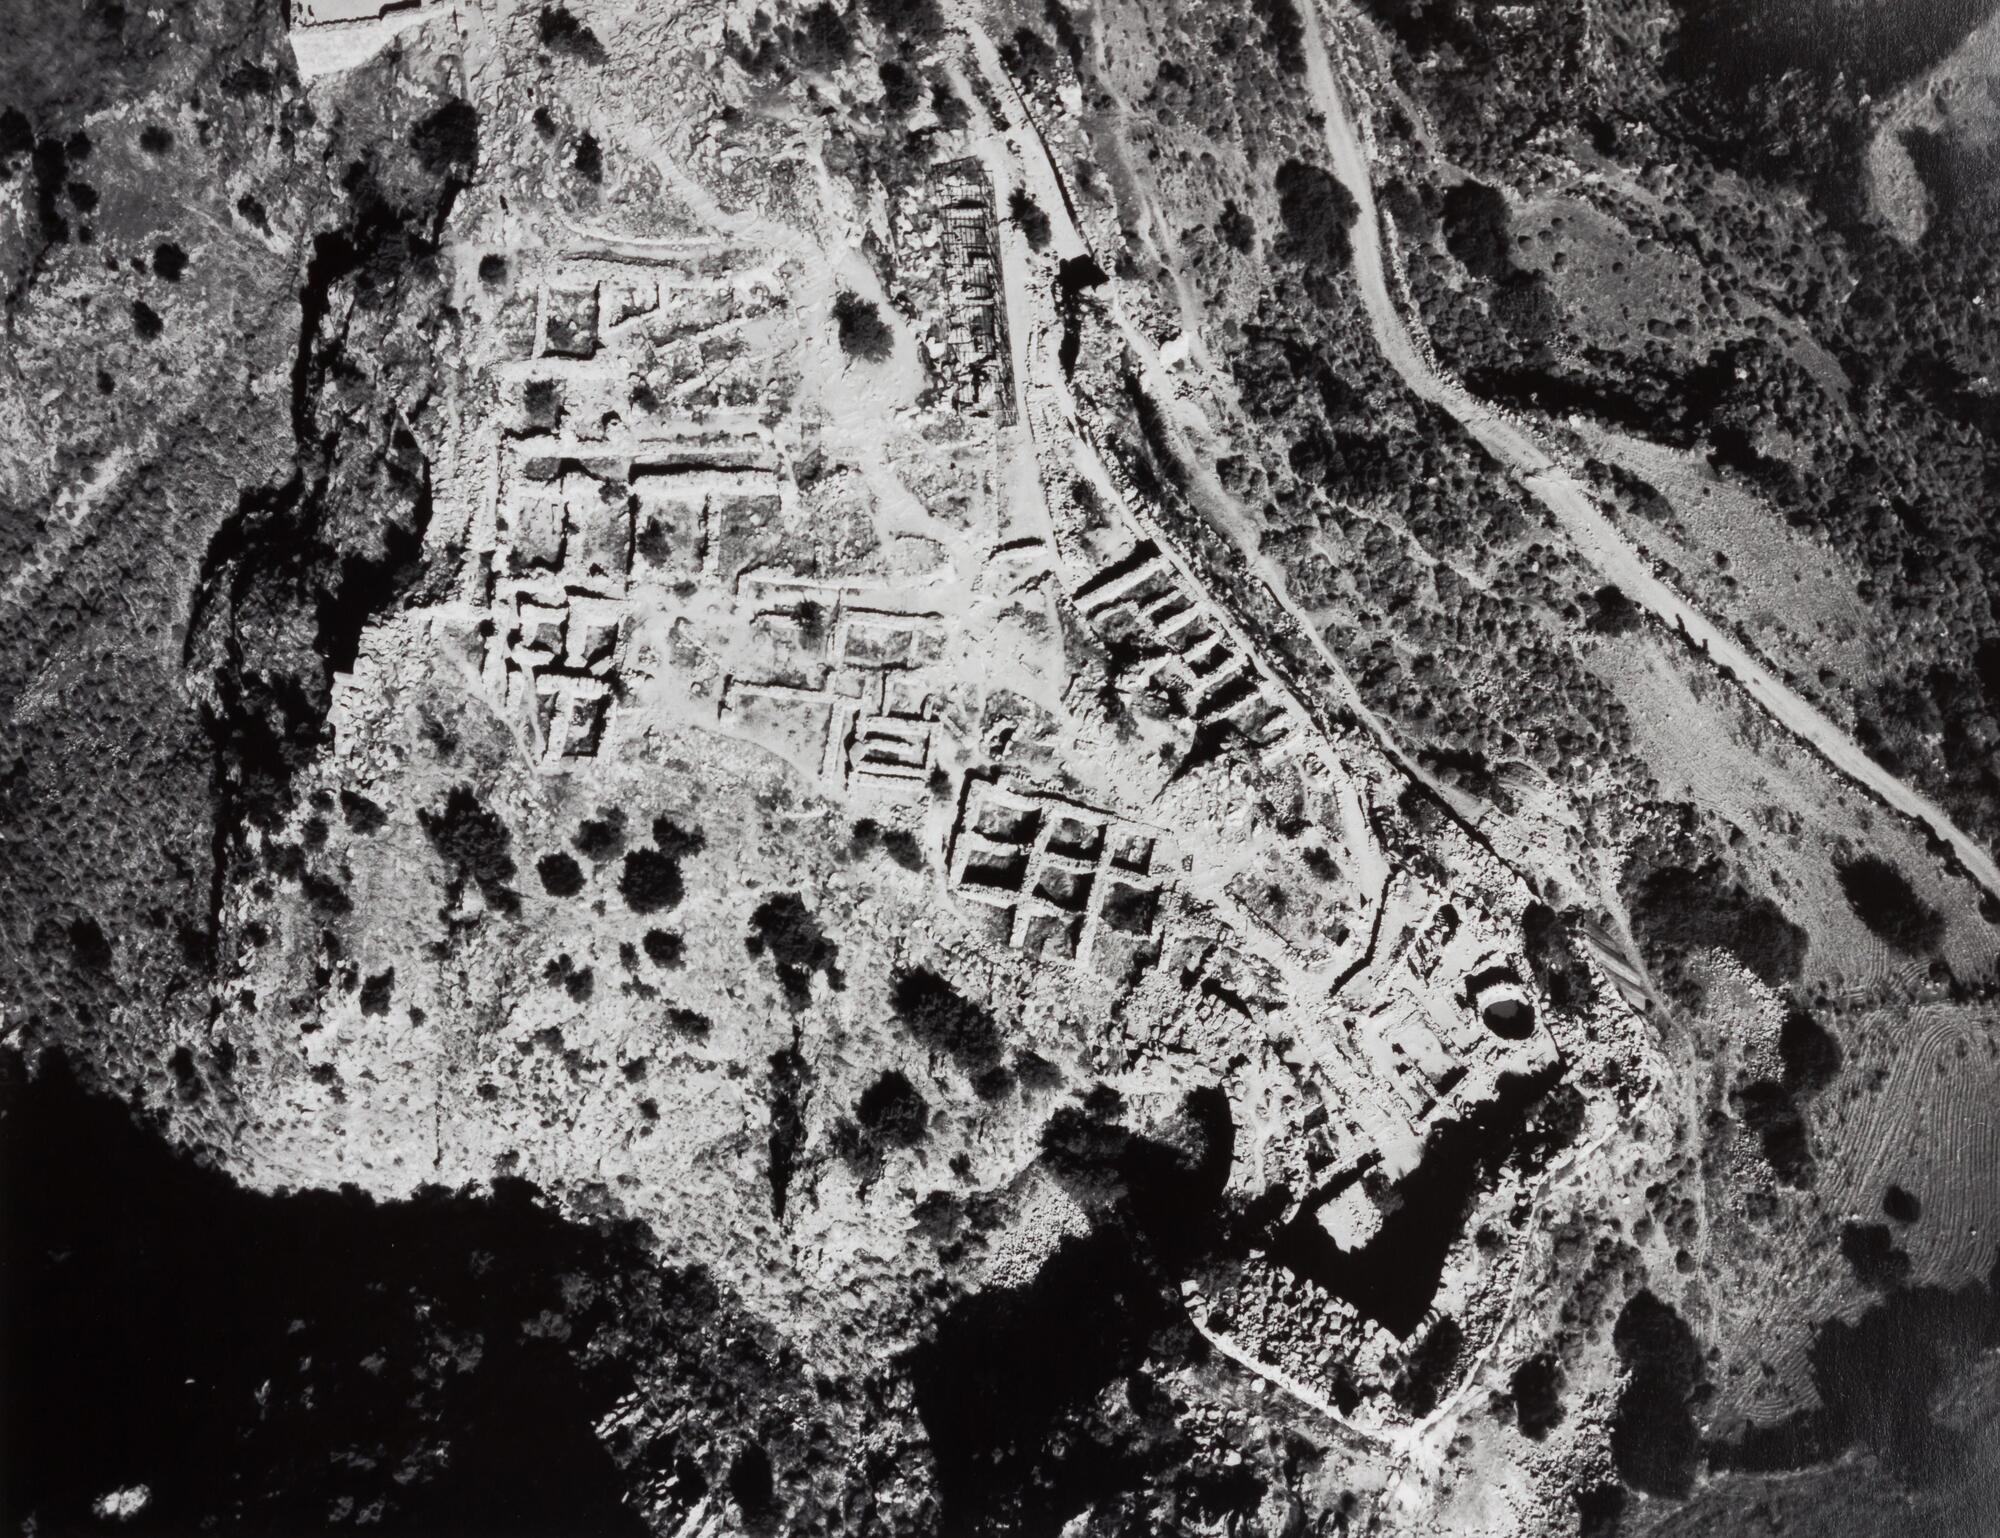 This photograph depicts an aerial view of an ancient grave site. 